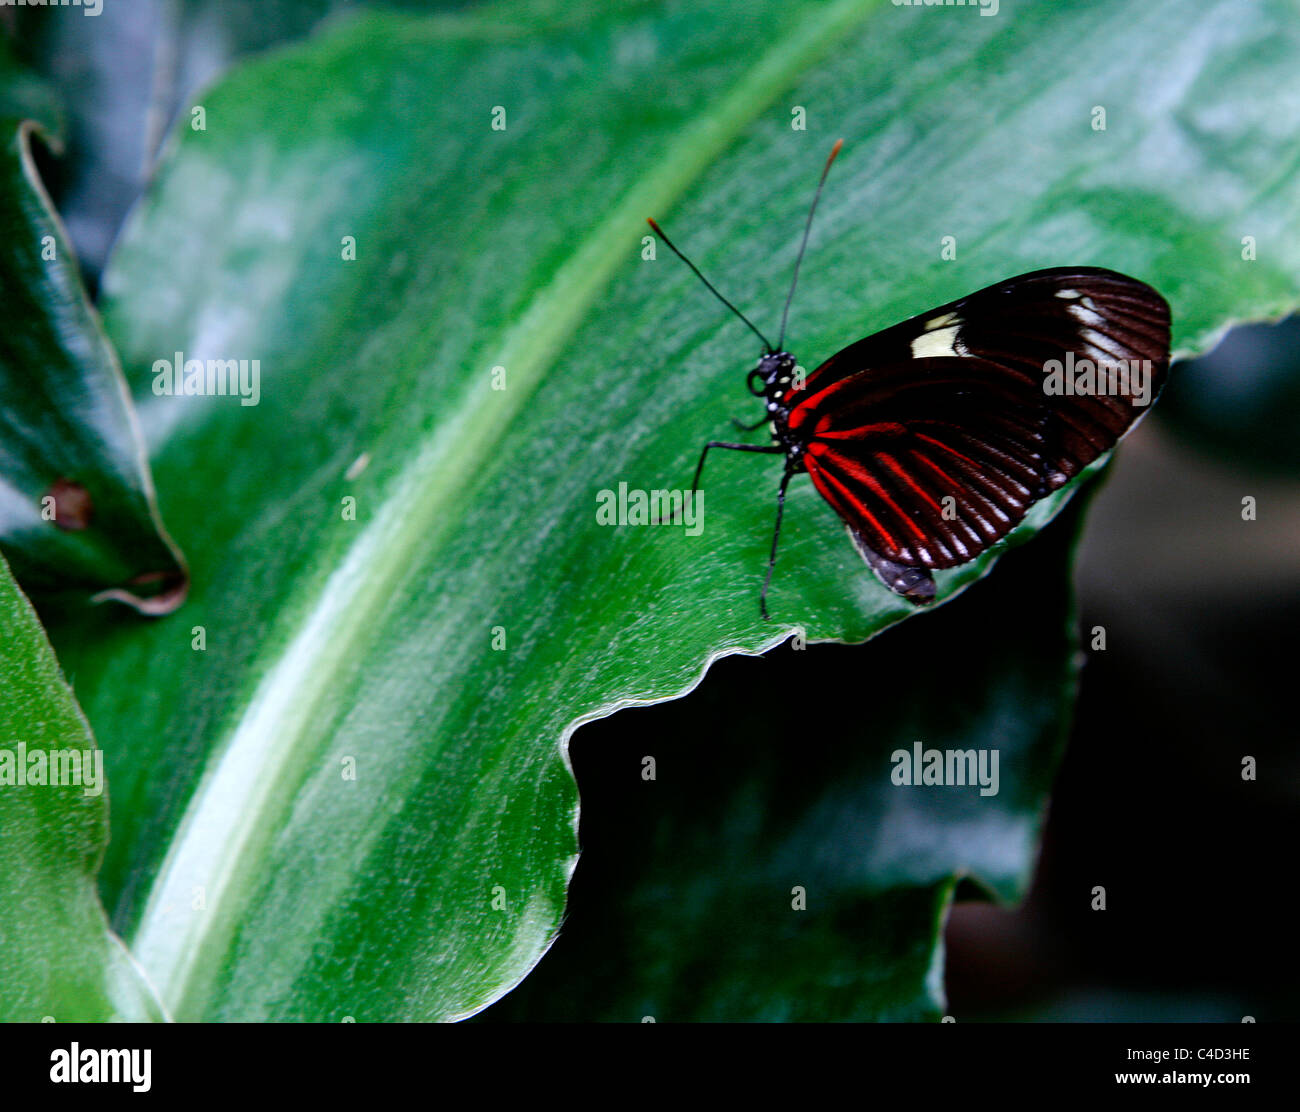 A red passion flower butterfly ( Heliconius erato ) from South America lingering on a leaf. Stock Photo